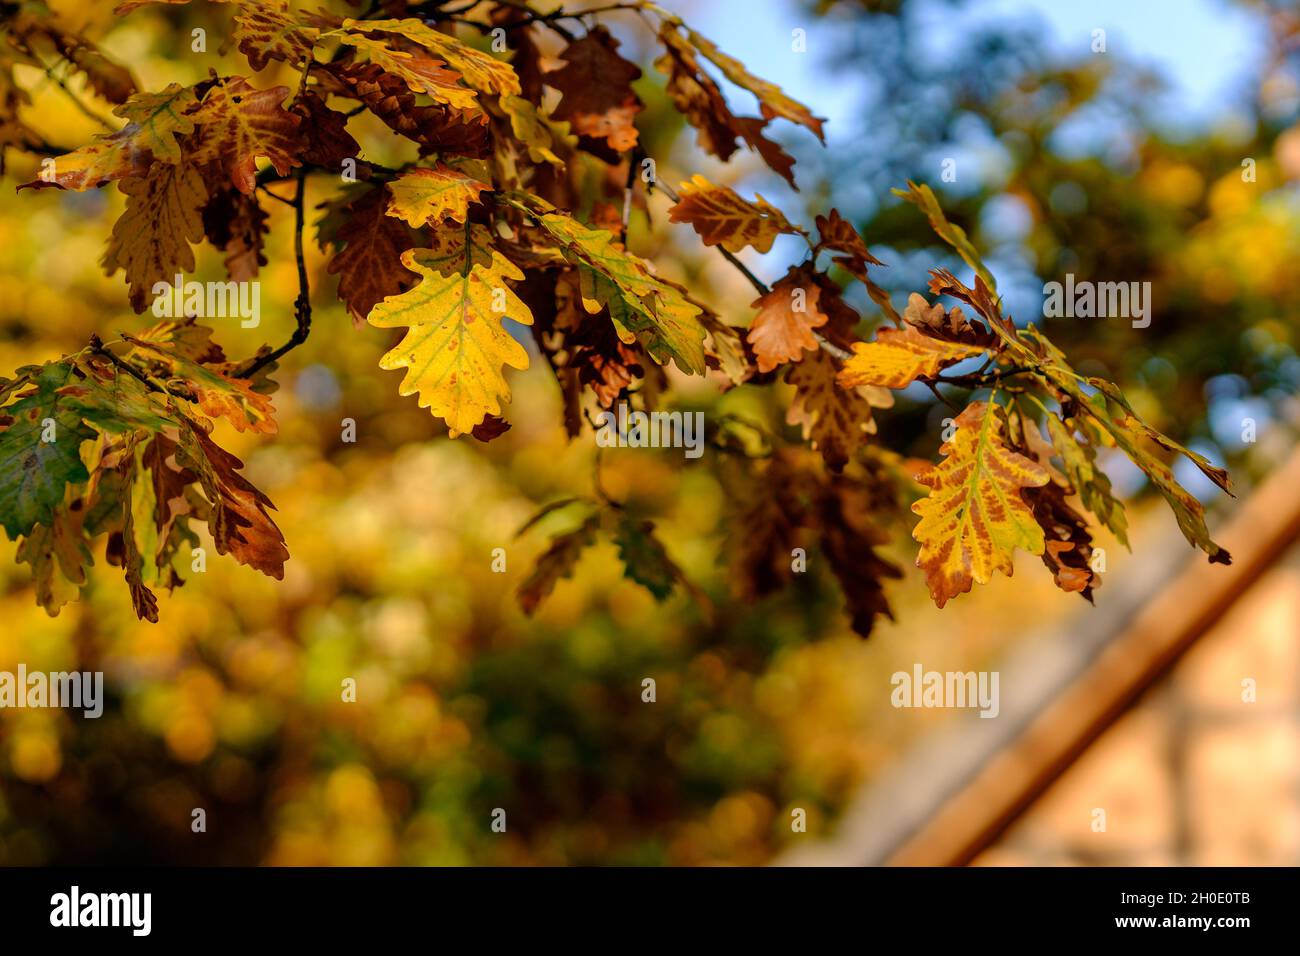 Colorful bright autumn leaves hanging on an oak tree in autumnal garden. House in blurry background. Beautiful fall nature scene. Very shallow focus. Stock Photo